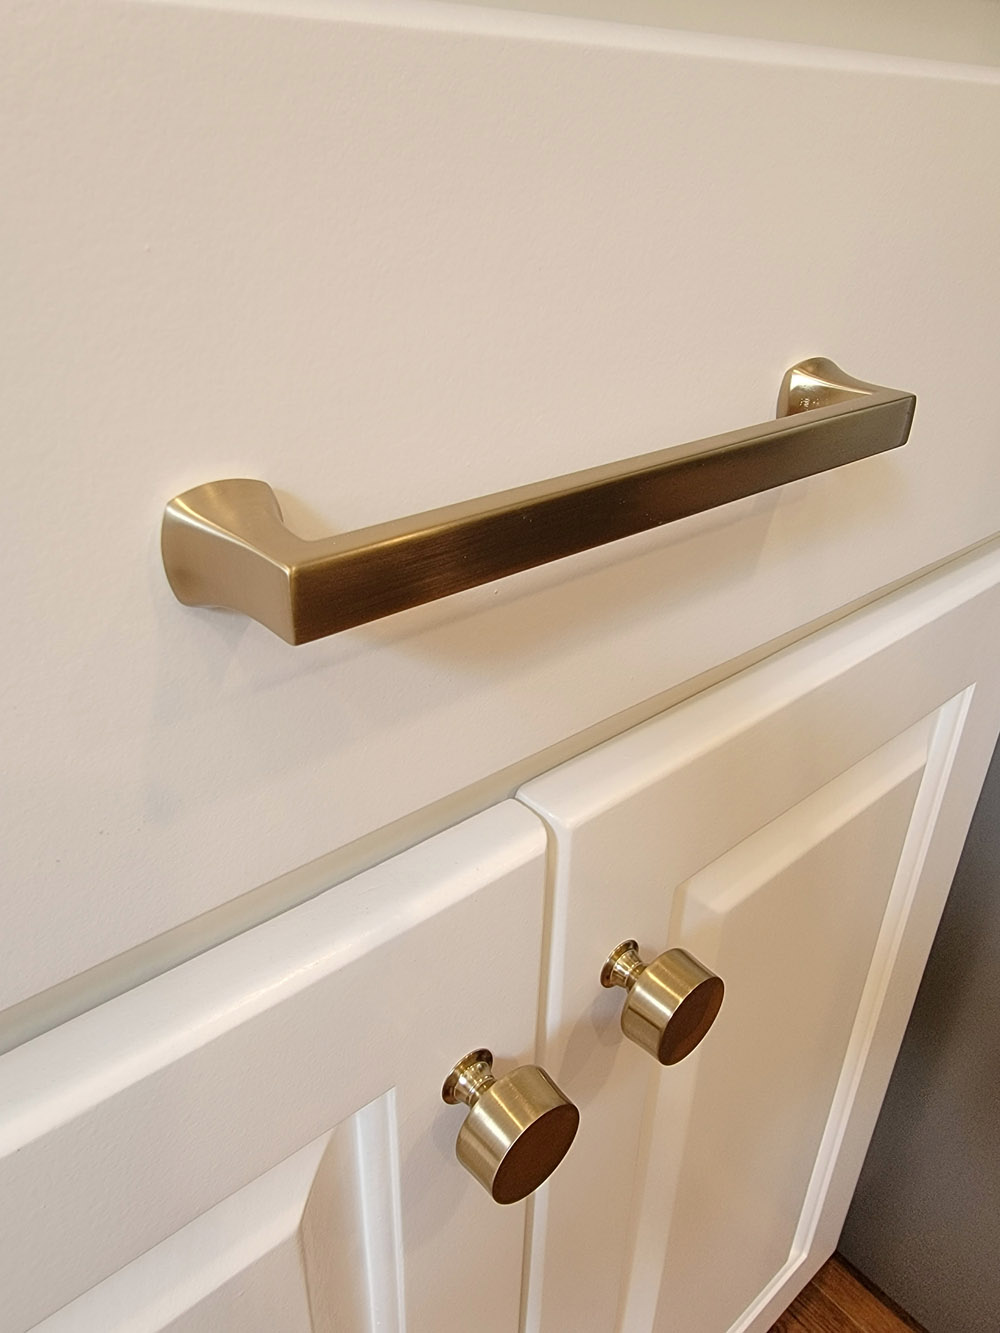 Updated cabinet fixture painted white with brass knobs and pull.